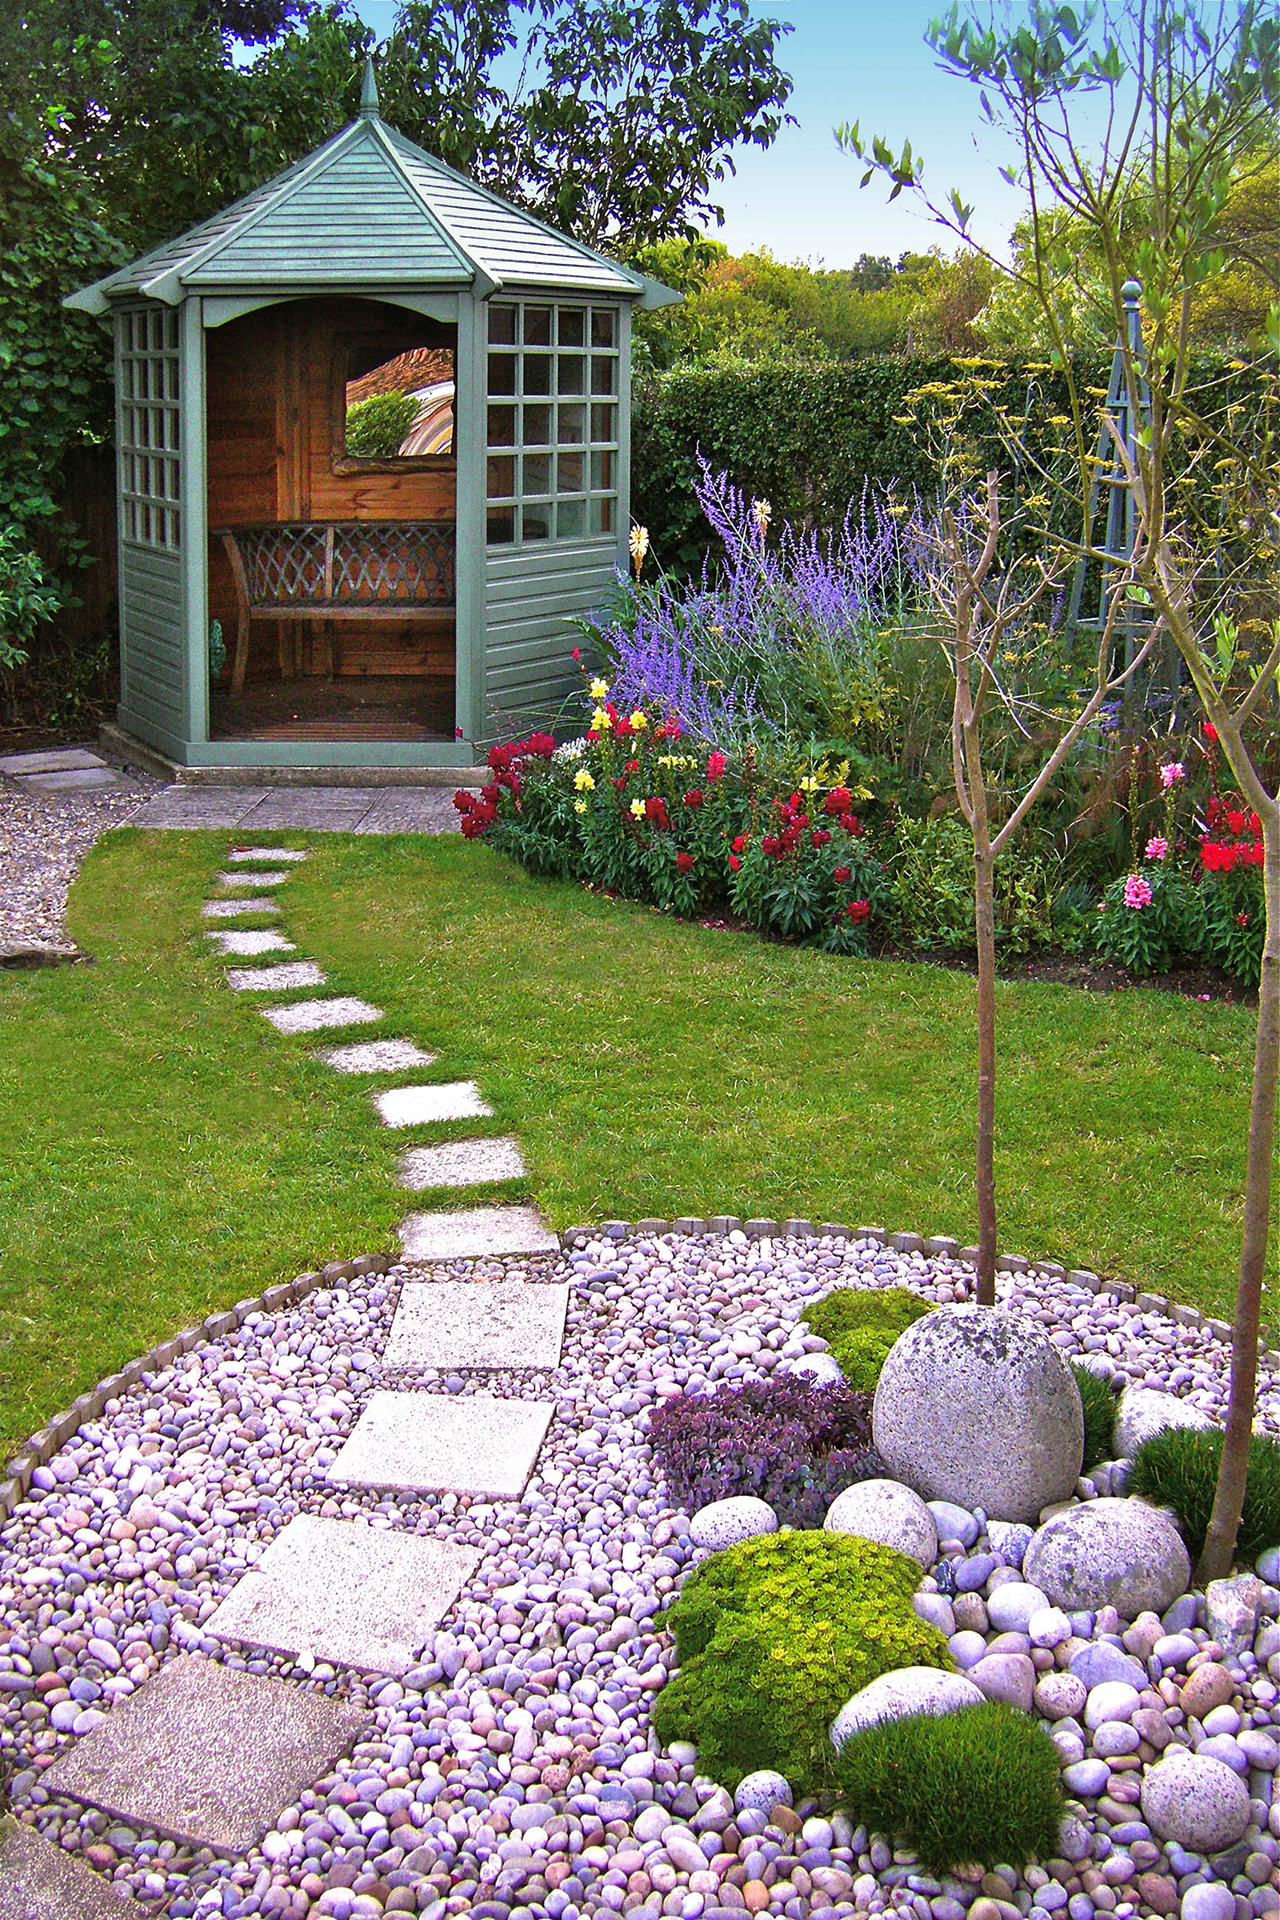 13.SIMPHOME.COM best backyard landscaping ideas and designs in 2019